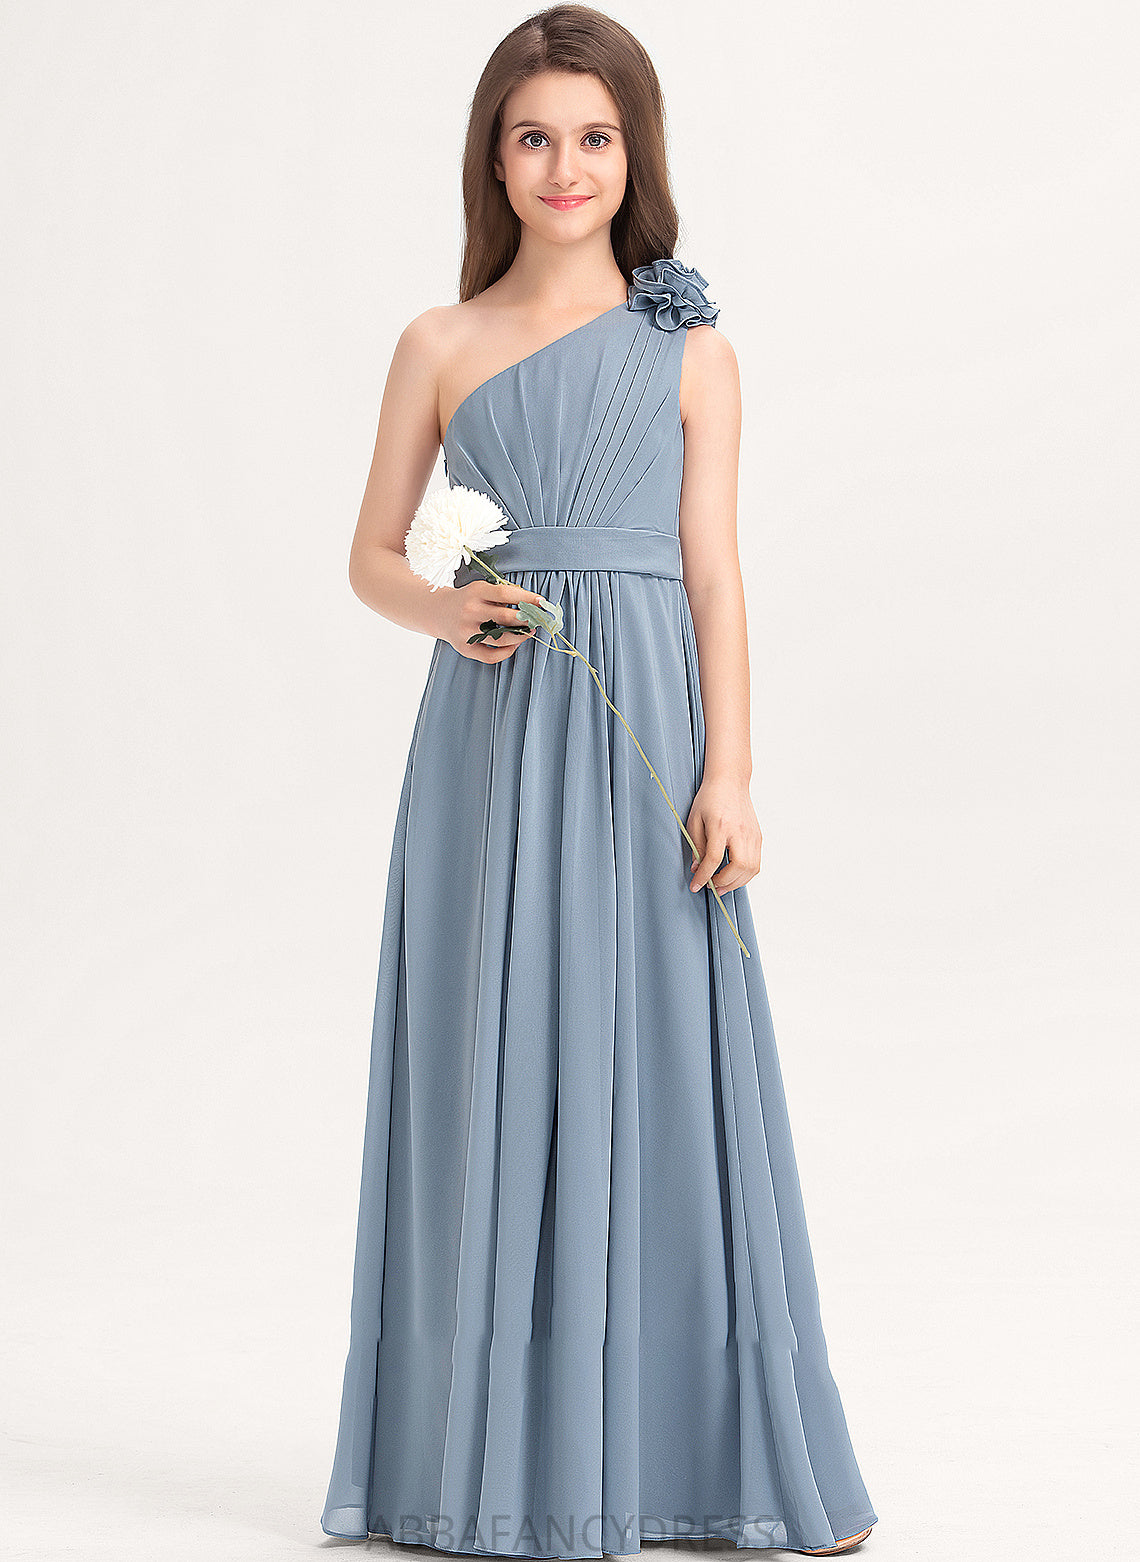 One-Shoulder Flower(s) Chiffon Floor-Length A-Line Junior Bridesmaid Dresses With Ruffle Anabel